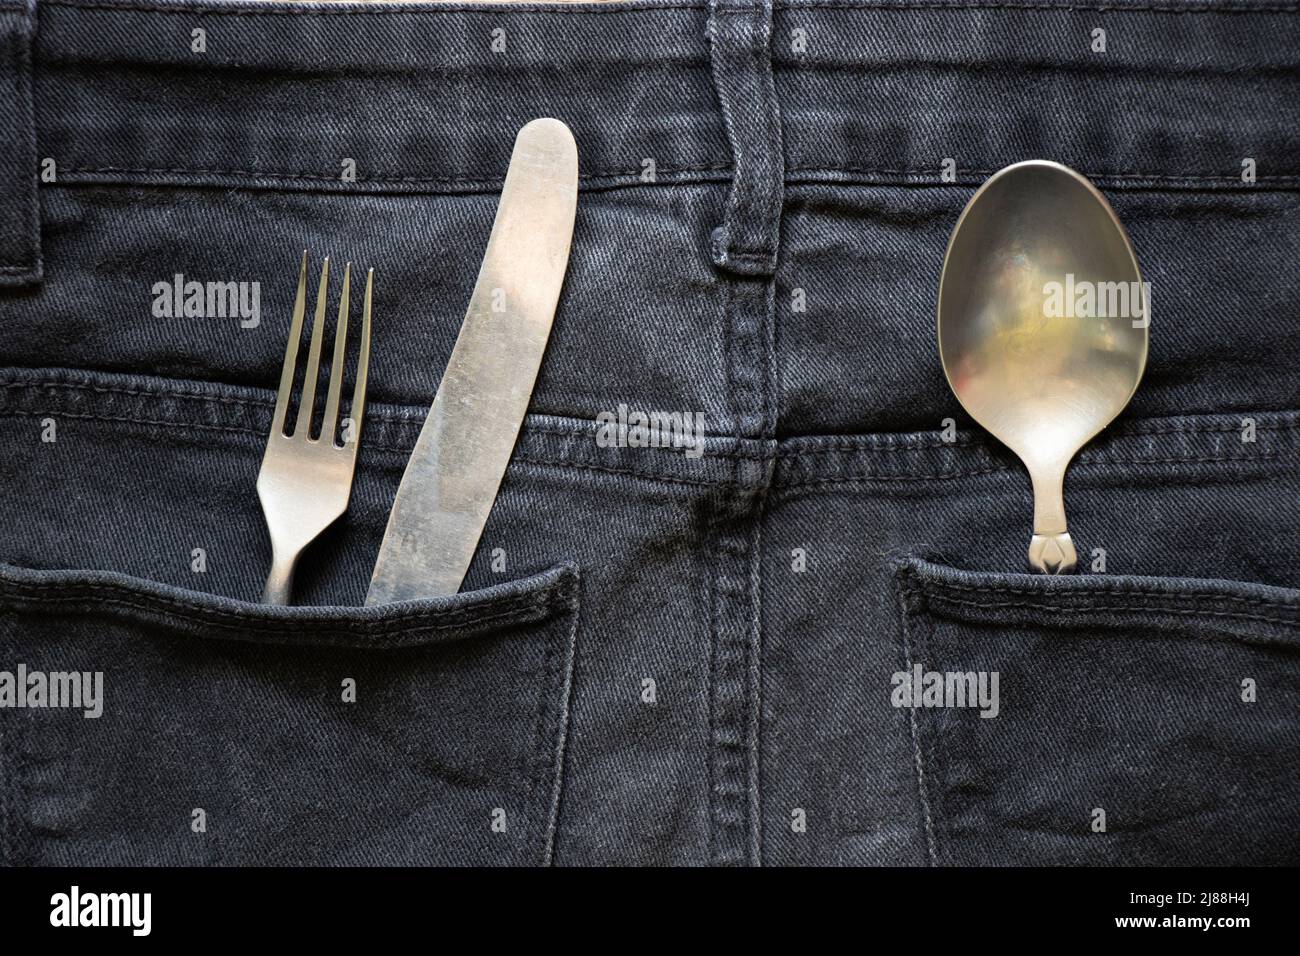 Knife, fork and spoon are in the pocket of gray jeans, cutlery in my pocket, I carry mine with me, fashion and trend, restaurant business Stock Photo